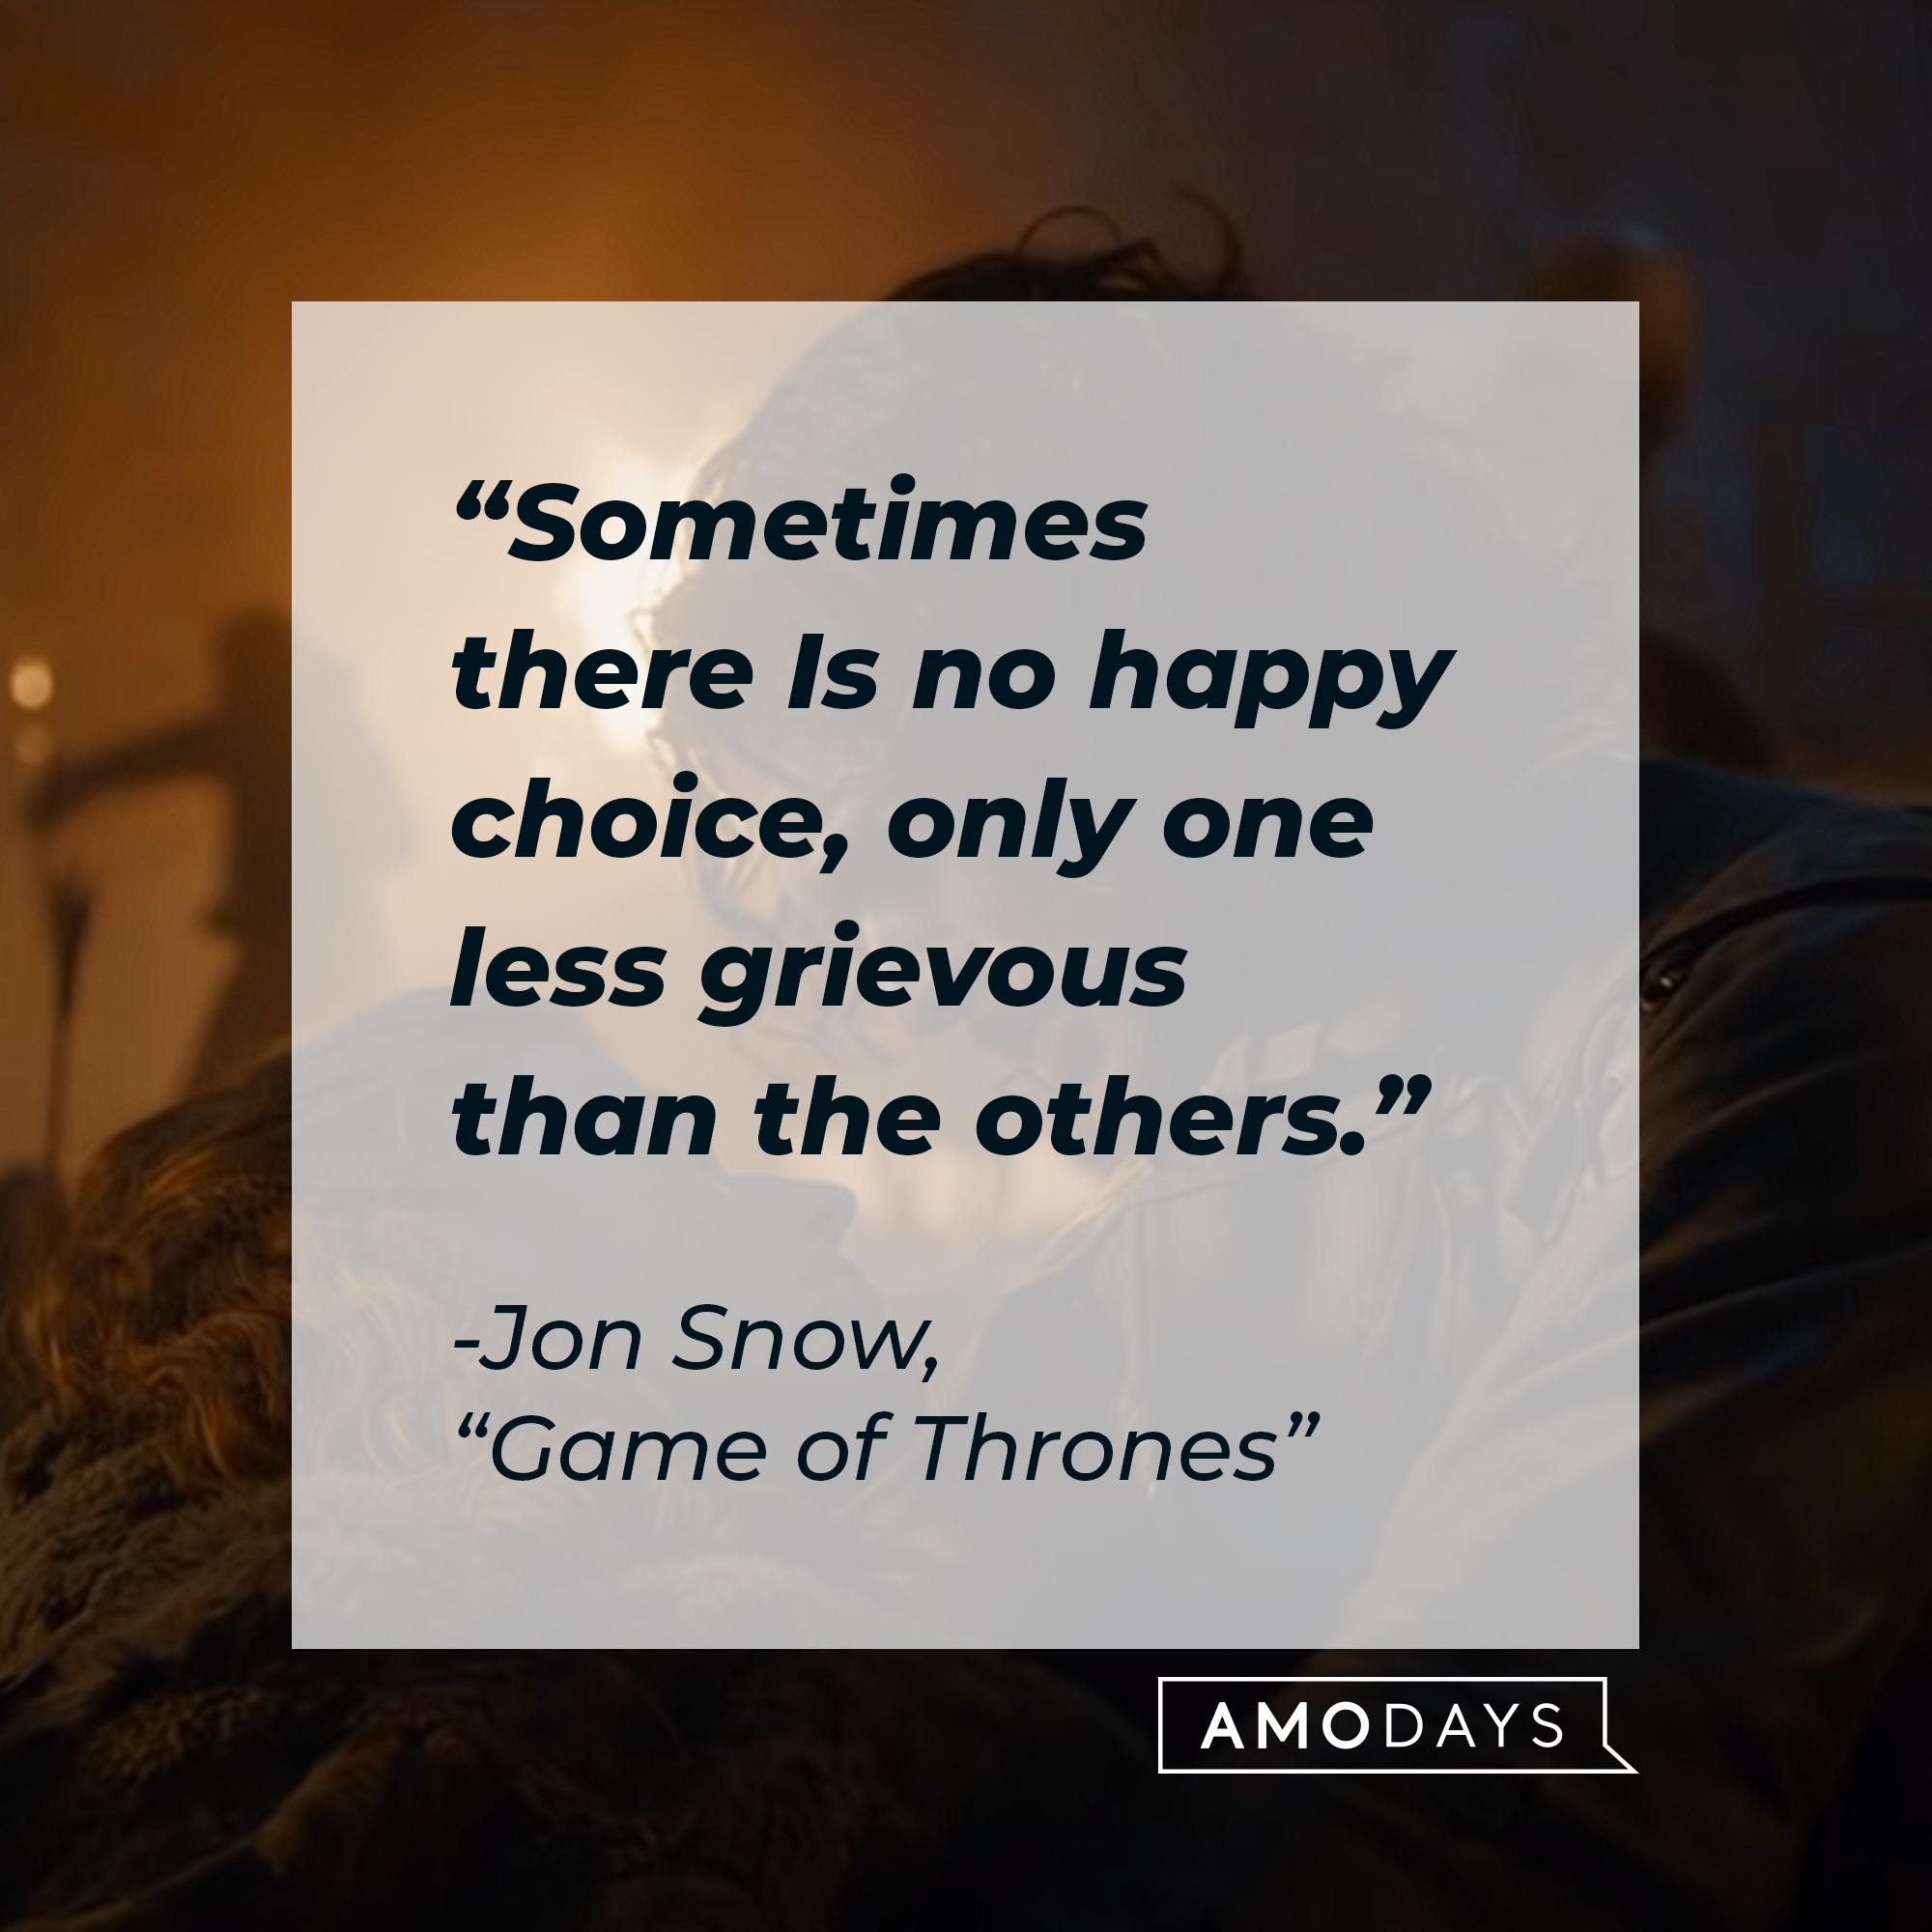 A photo of Jon Snow with the quote, "Sometimes there Is no happy choice, only one less grievous than the others." | Source: YouTube/gameofthrones